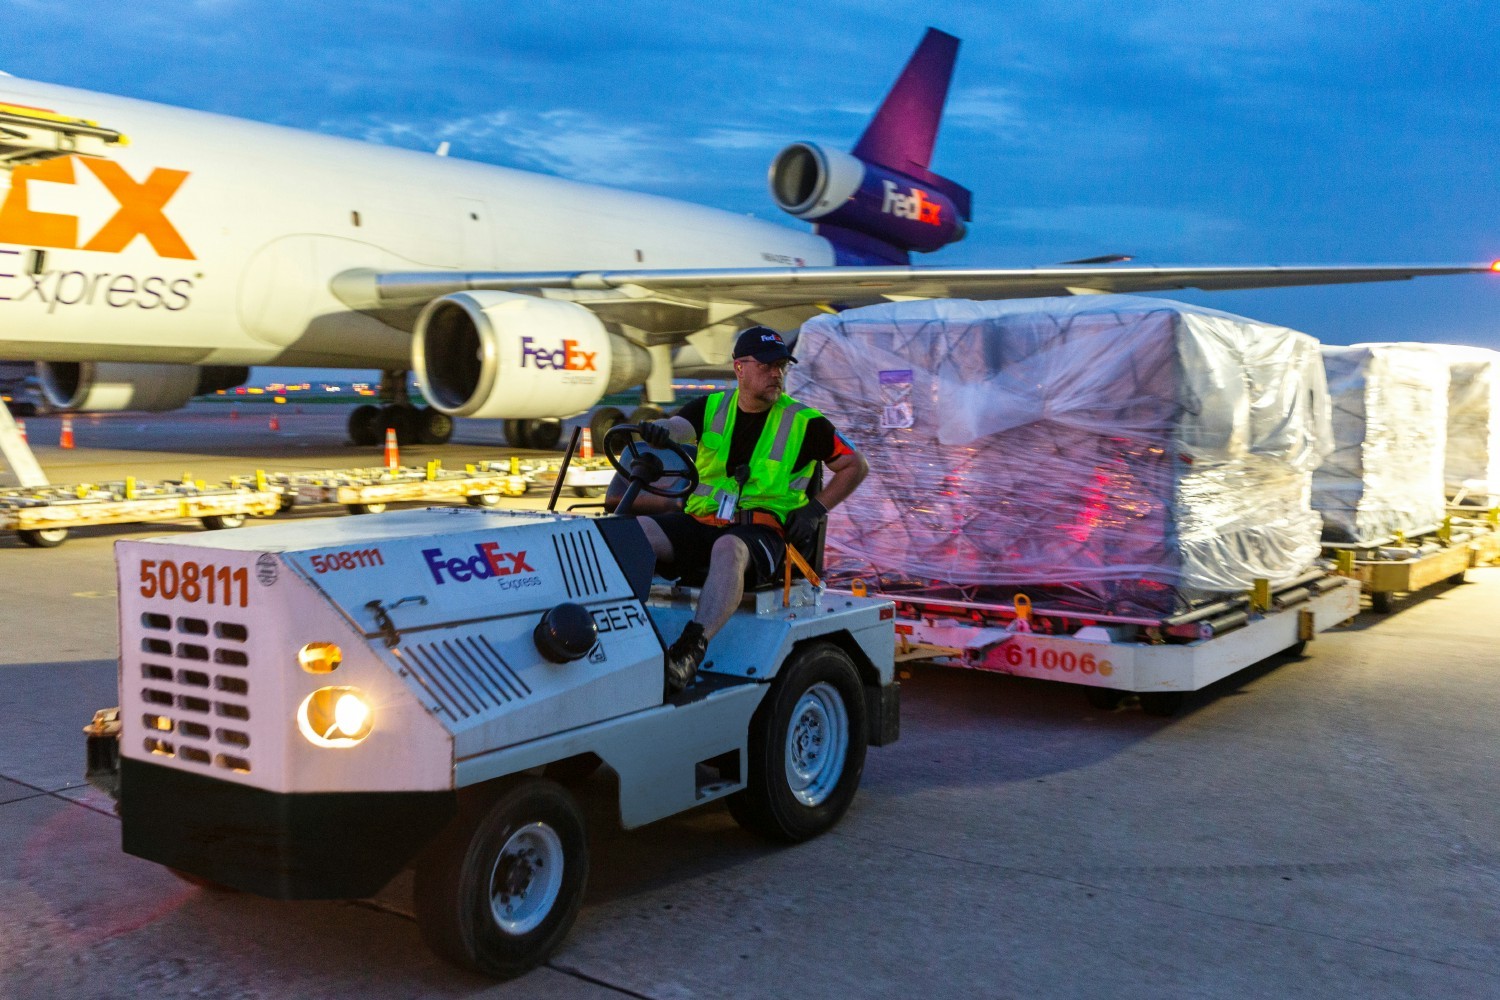 Since the outbreak of COVID, FedEx has delivered vaccines, PPE and critical supplies to organizations around the world.